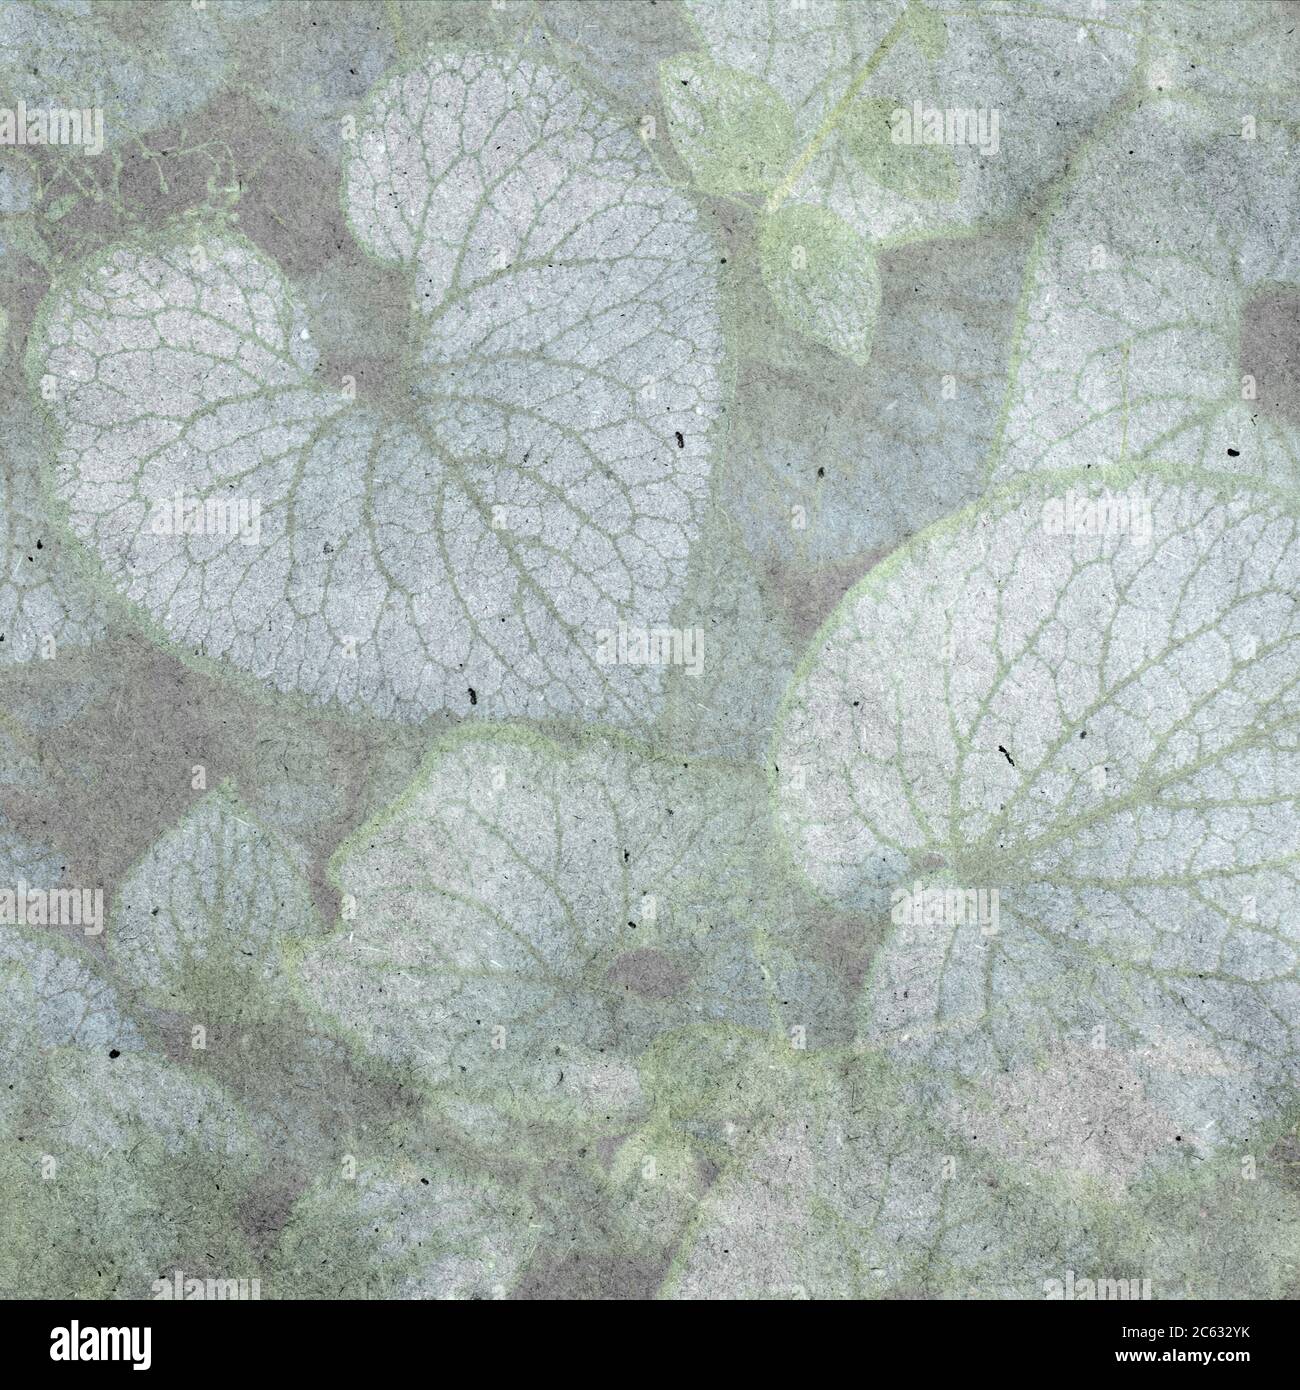 Heartleaf brunnera (binomial name: Brunnera macrophylla), also known as Siberian bugloss, in a spring . textured stylish old paper background, square, Stock Photo